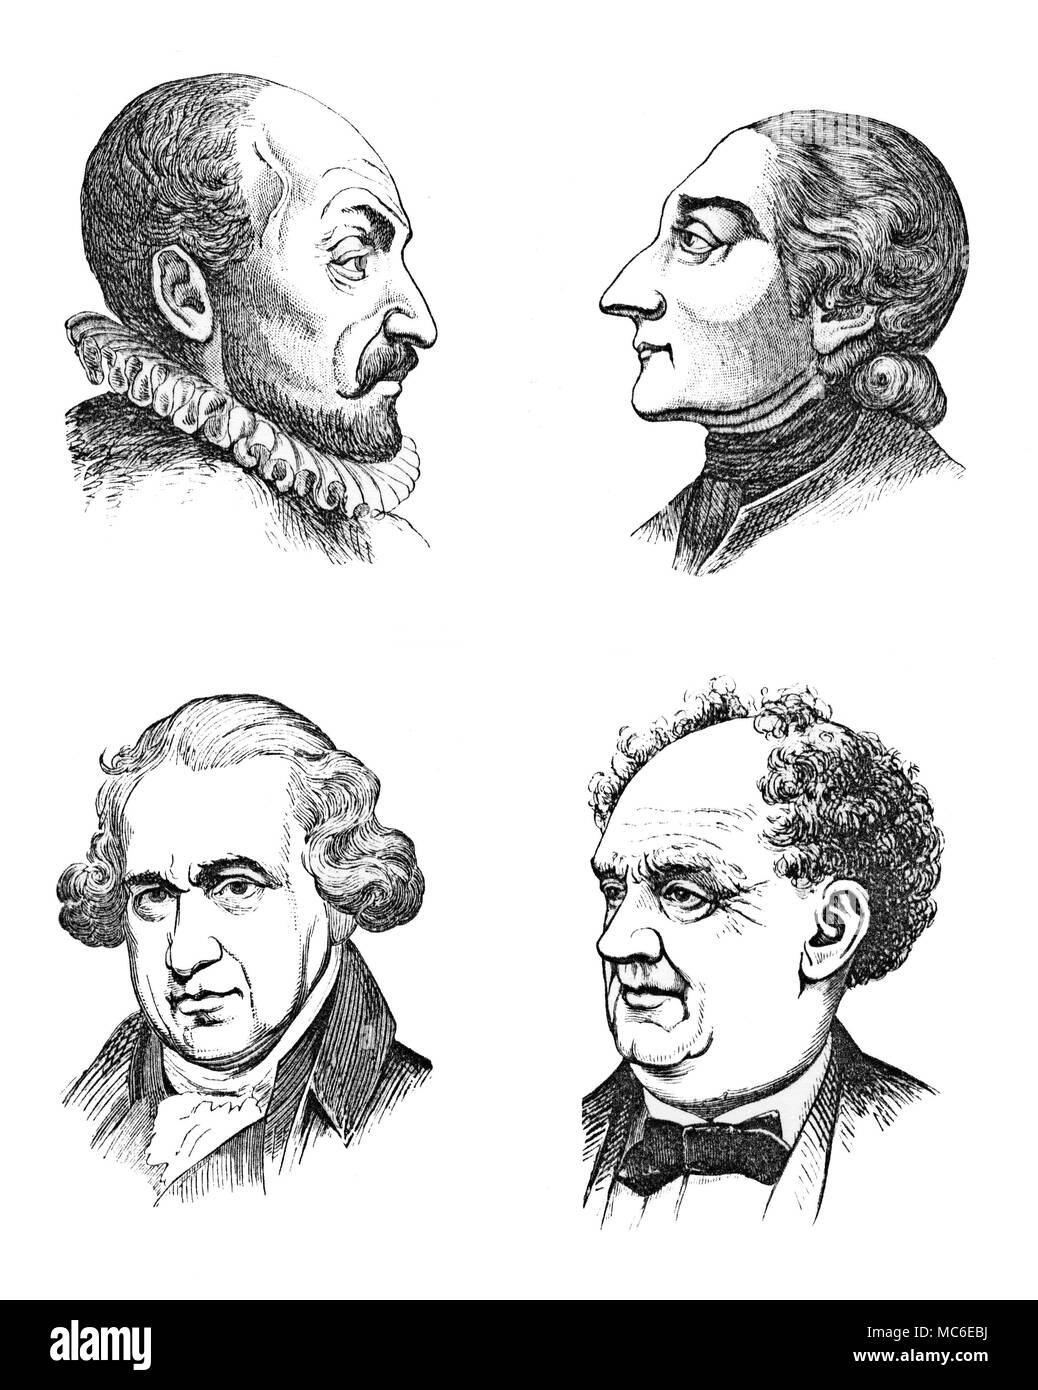 PHRENOLOGY AND PHYSIOGNOMY [Top, from left] the heads of two physiognomists - the Swiss, Jean-Baptiste de la Porta, and the Neapolitan, Jean Lavater. Both portraits have been selected because they exhibit 'large characterioscopicity'. [Bottom, from left], the Scottish mechanic and inventor, James Watt, and the showman, P.T. Barnum: the first is given as an example of 'large structurodexterity', the latter as an example of small, or 'negligible structurodexterity'. Barnum recorded that he did not have the ability even to whittle a barrel tap round. From J. Simms, An Original and Ill Stock Photo